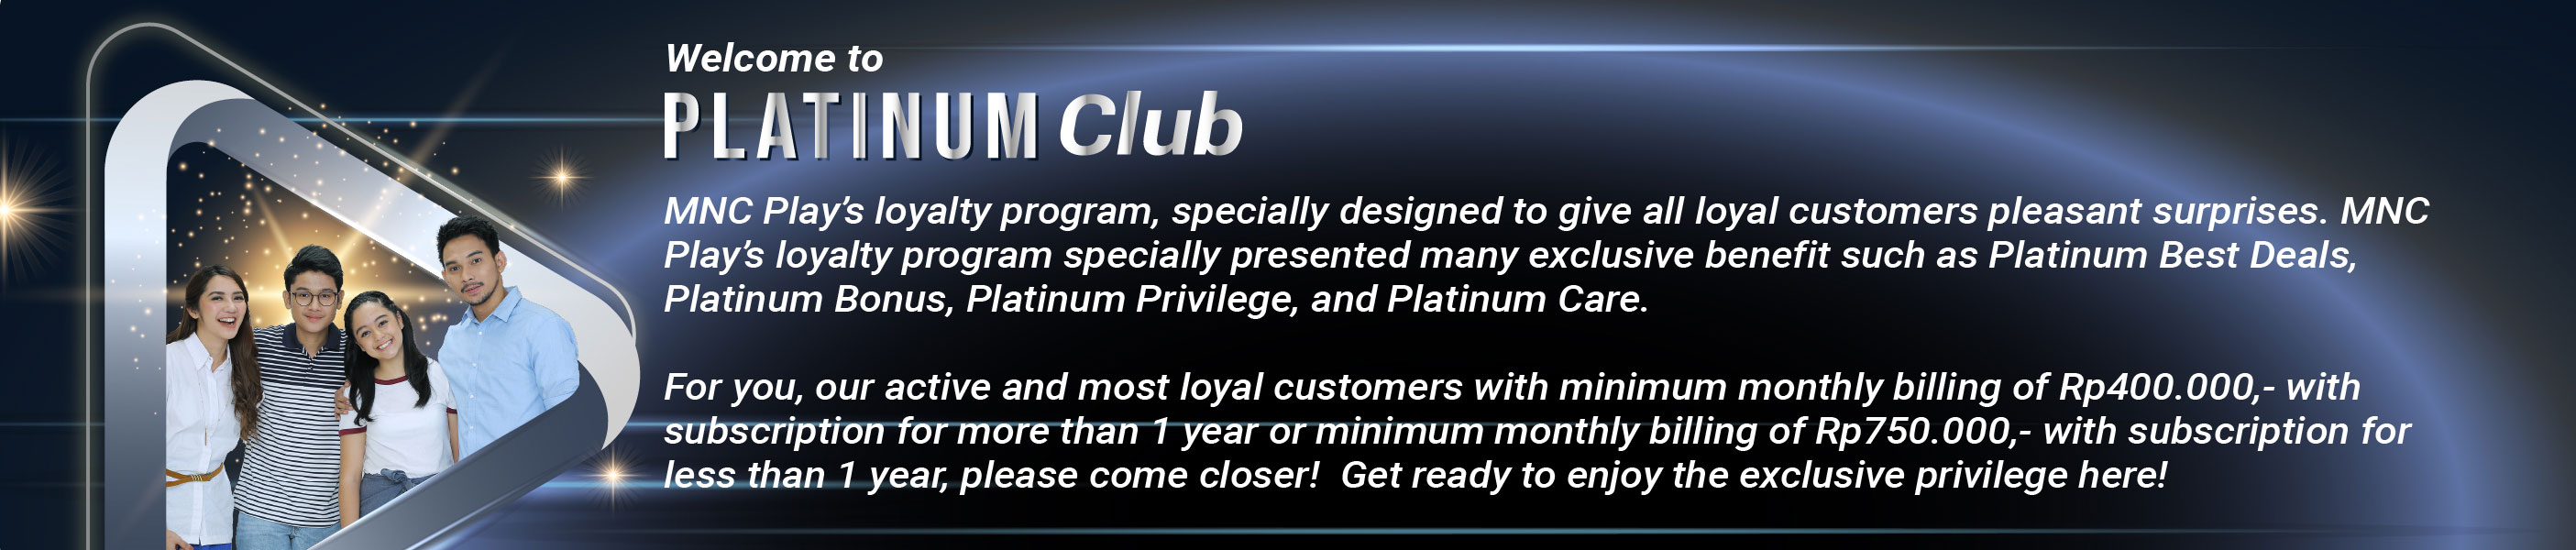 Welcome to Platinum Club